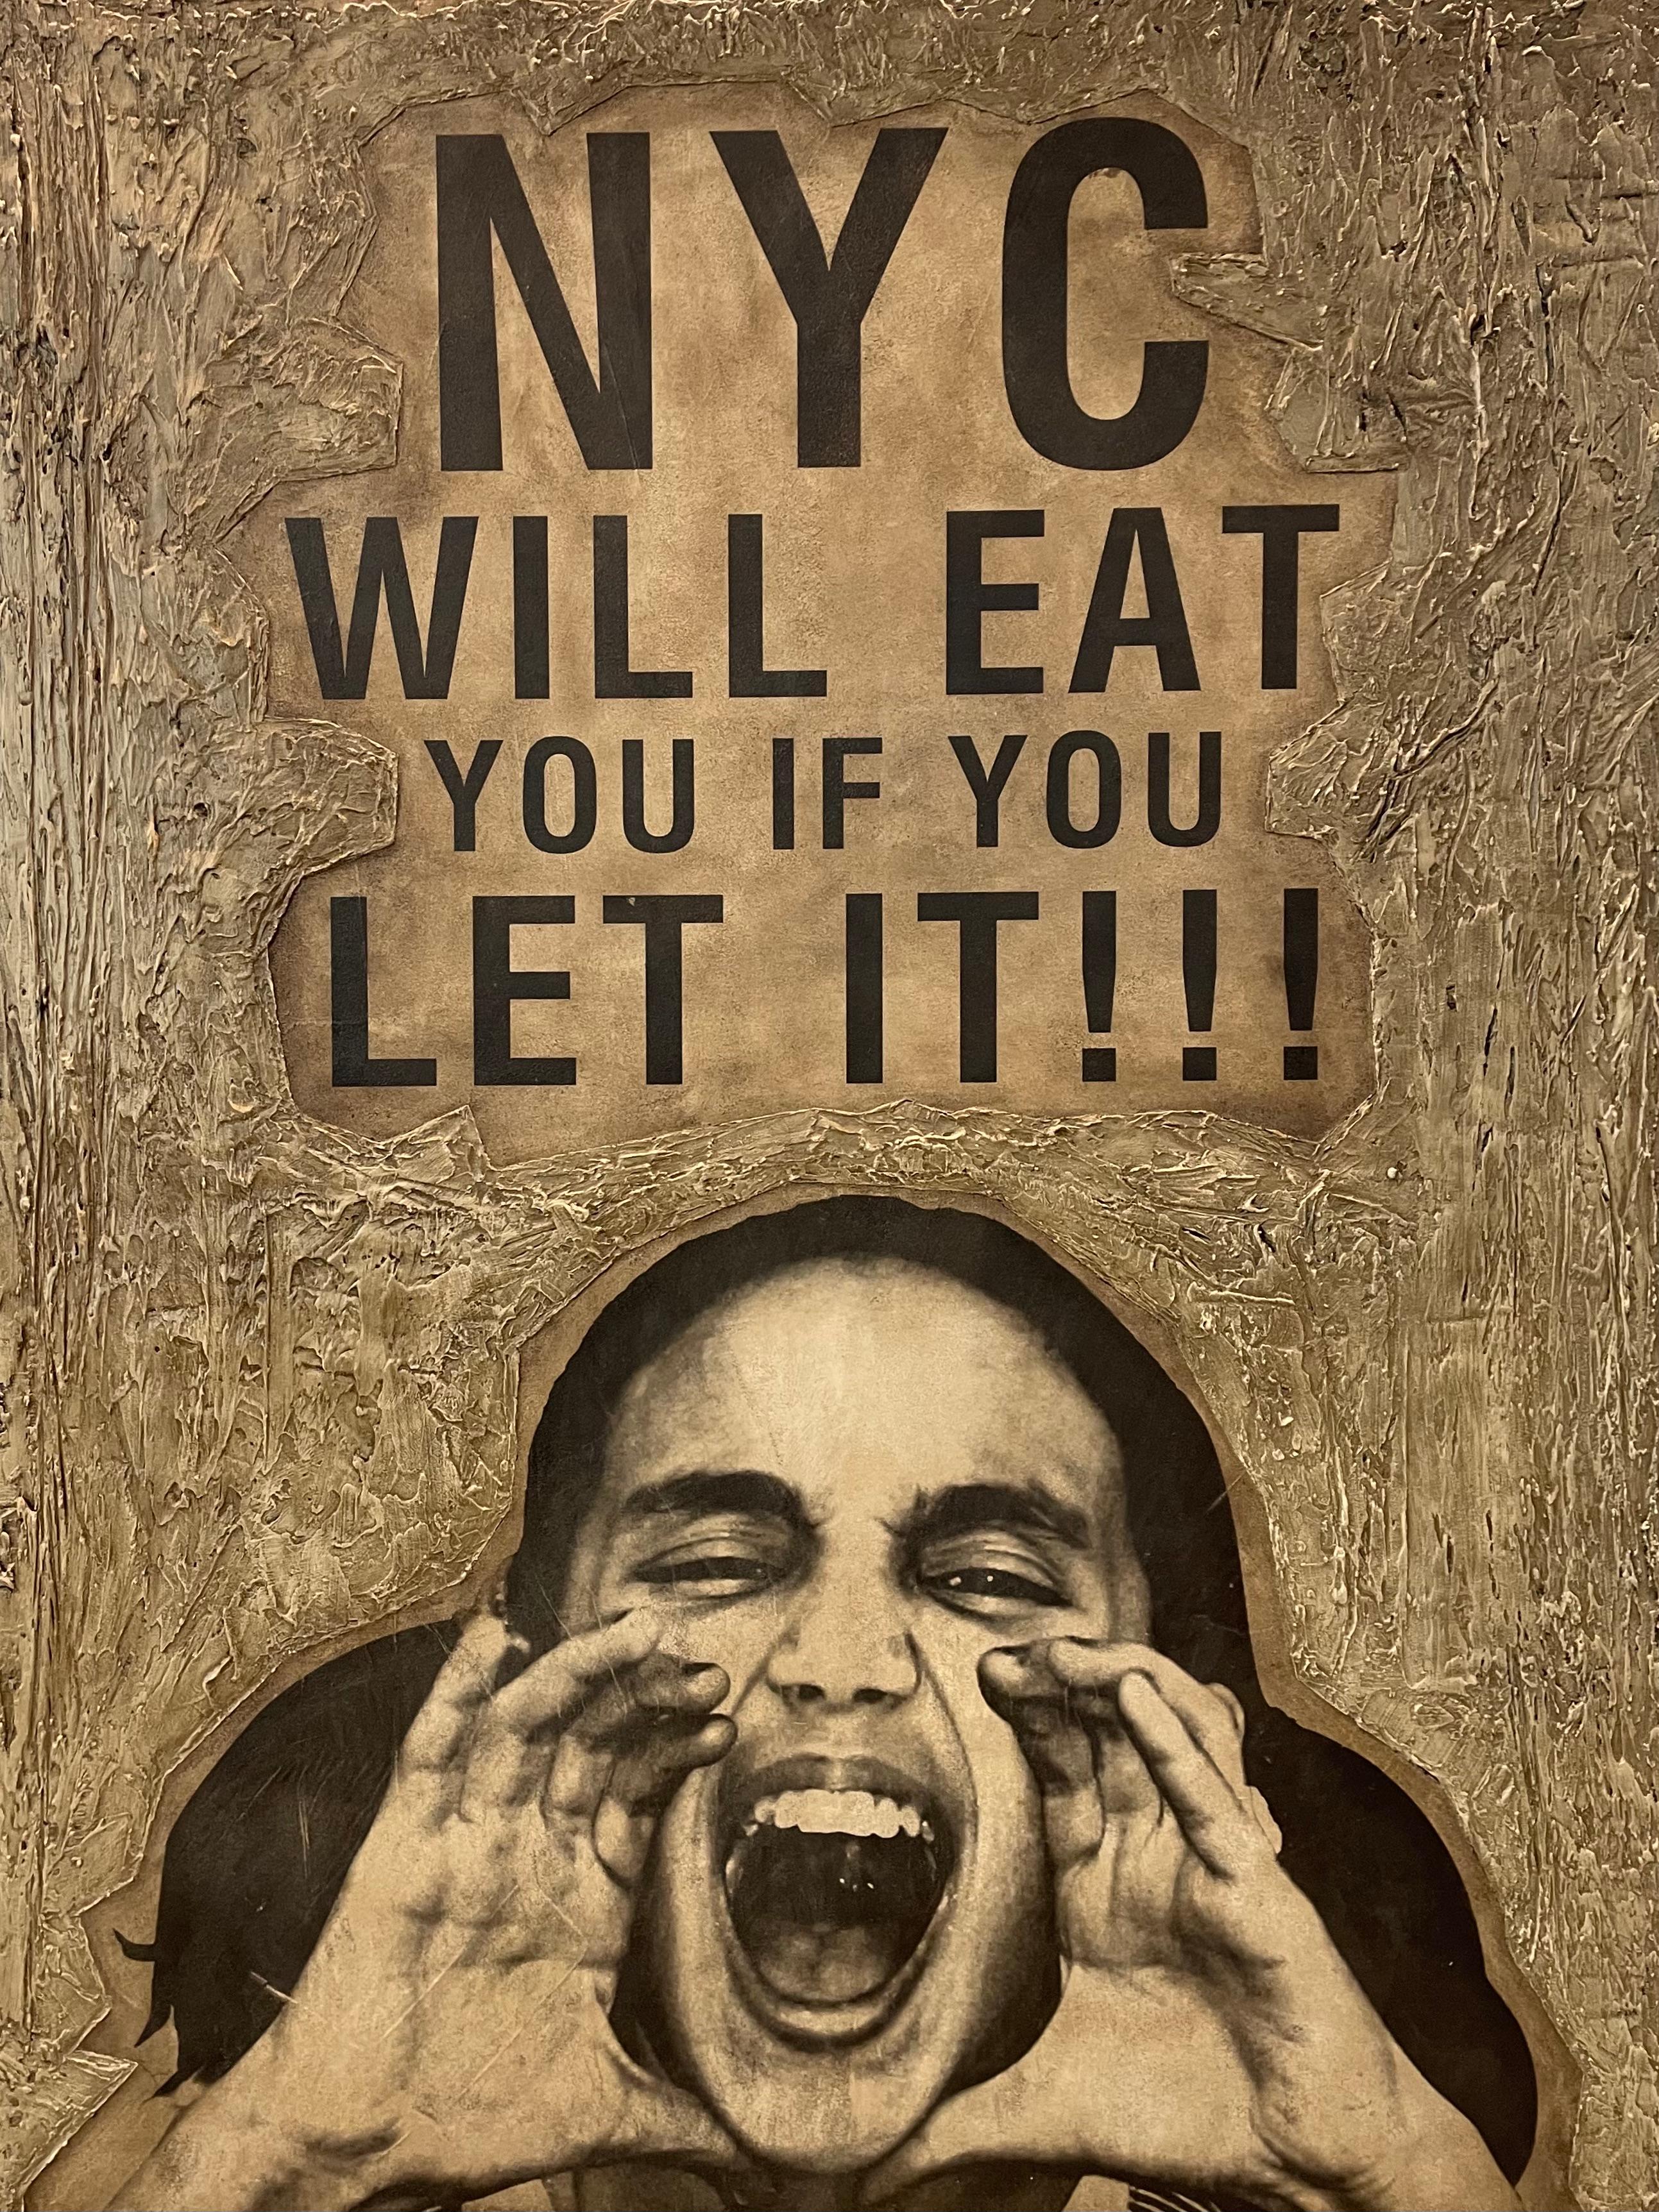 NYC WILL EAT YOU IF YOU LET IT!  - mixed media street art on canvas  - Painting by Ivan Orama